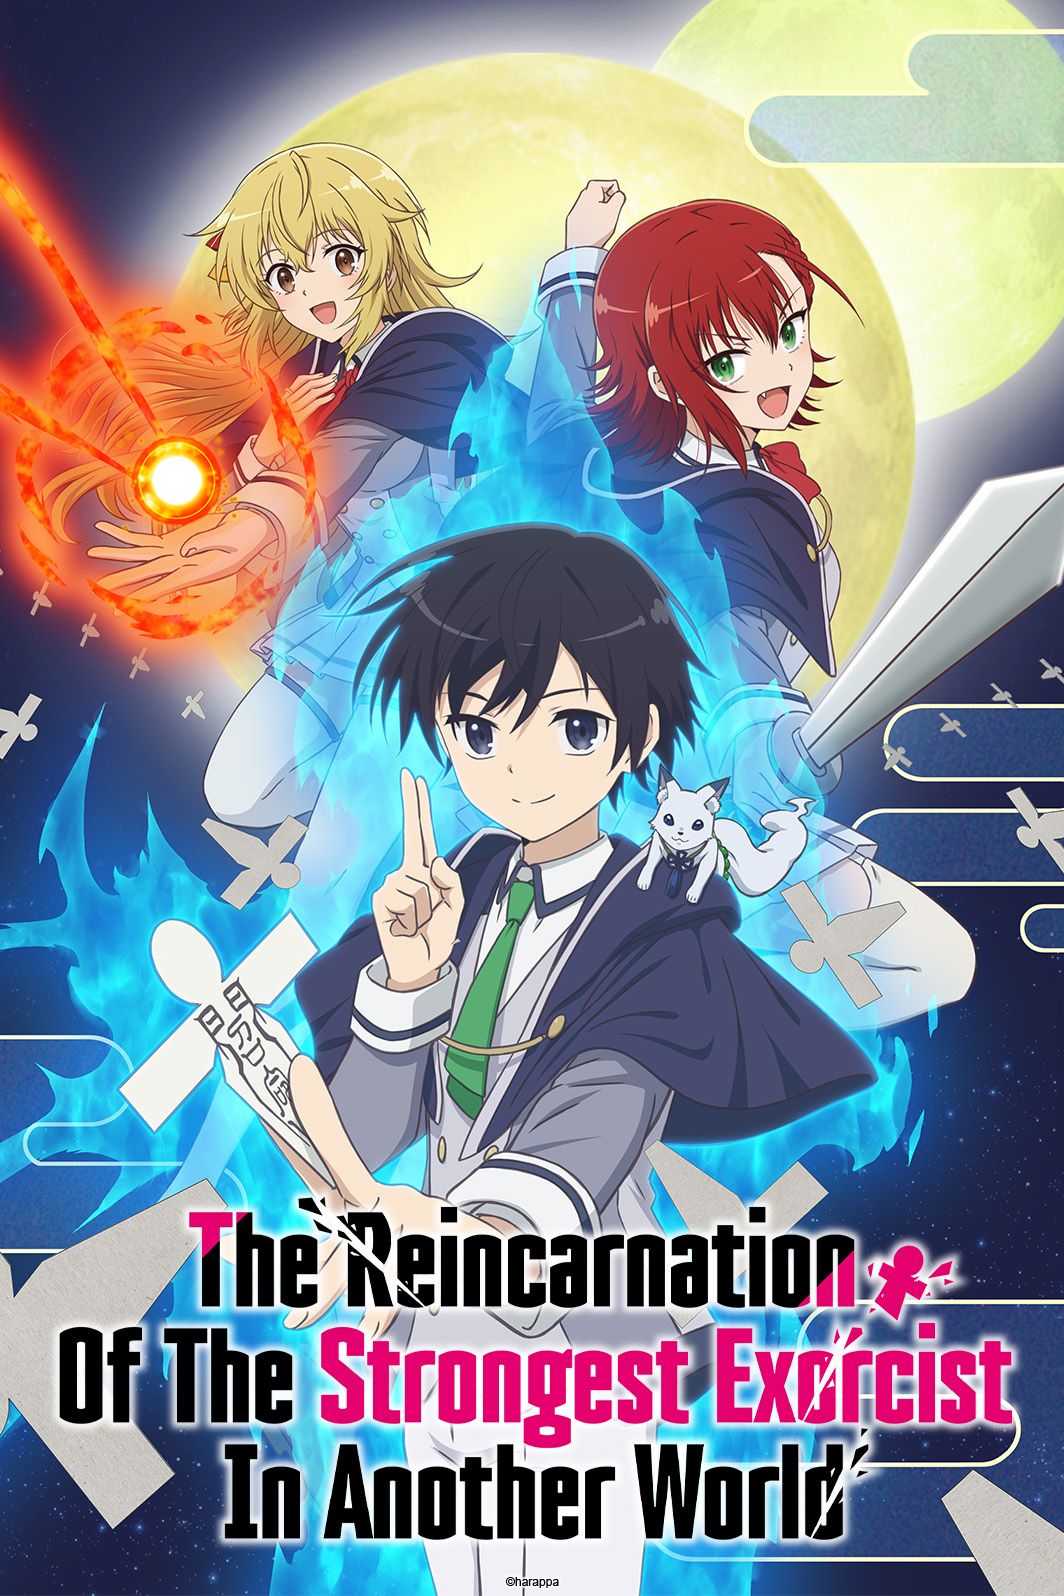 anime manga - The Reincarnation of the Strongest Exorcist in Another World